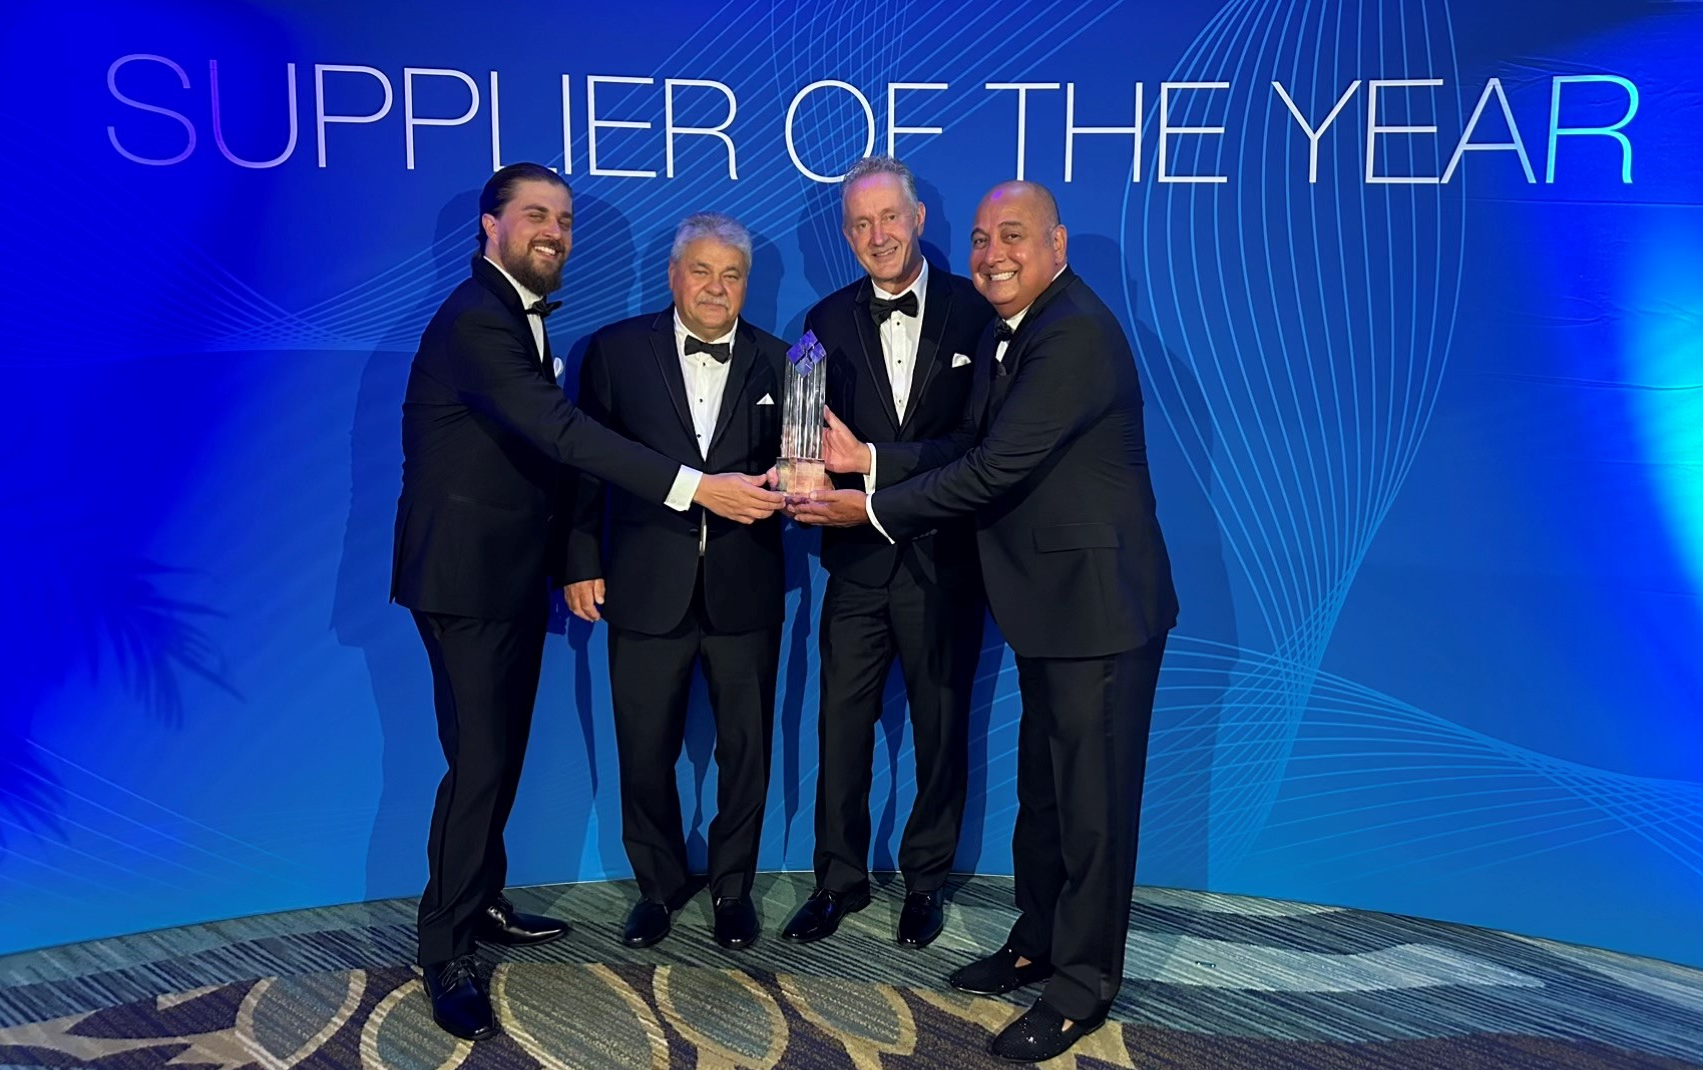 Management of Harper Engineering Co. receiving Supplier of the Year award at Boeing`s annual event.